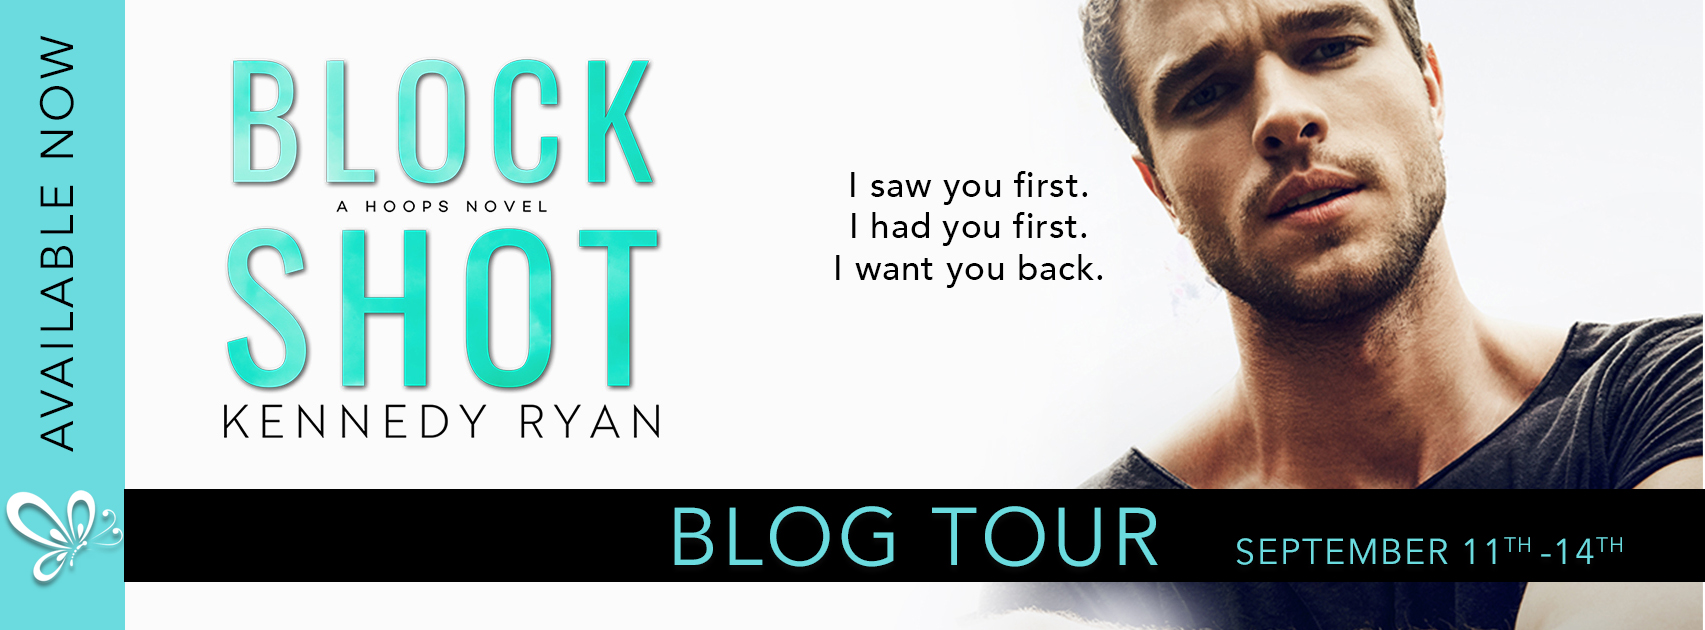 Review: Block Shot by Kennedy Ryan